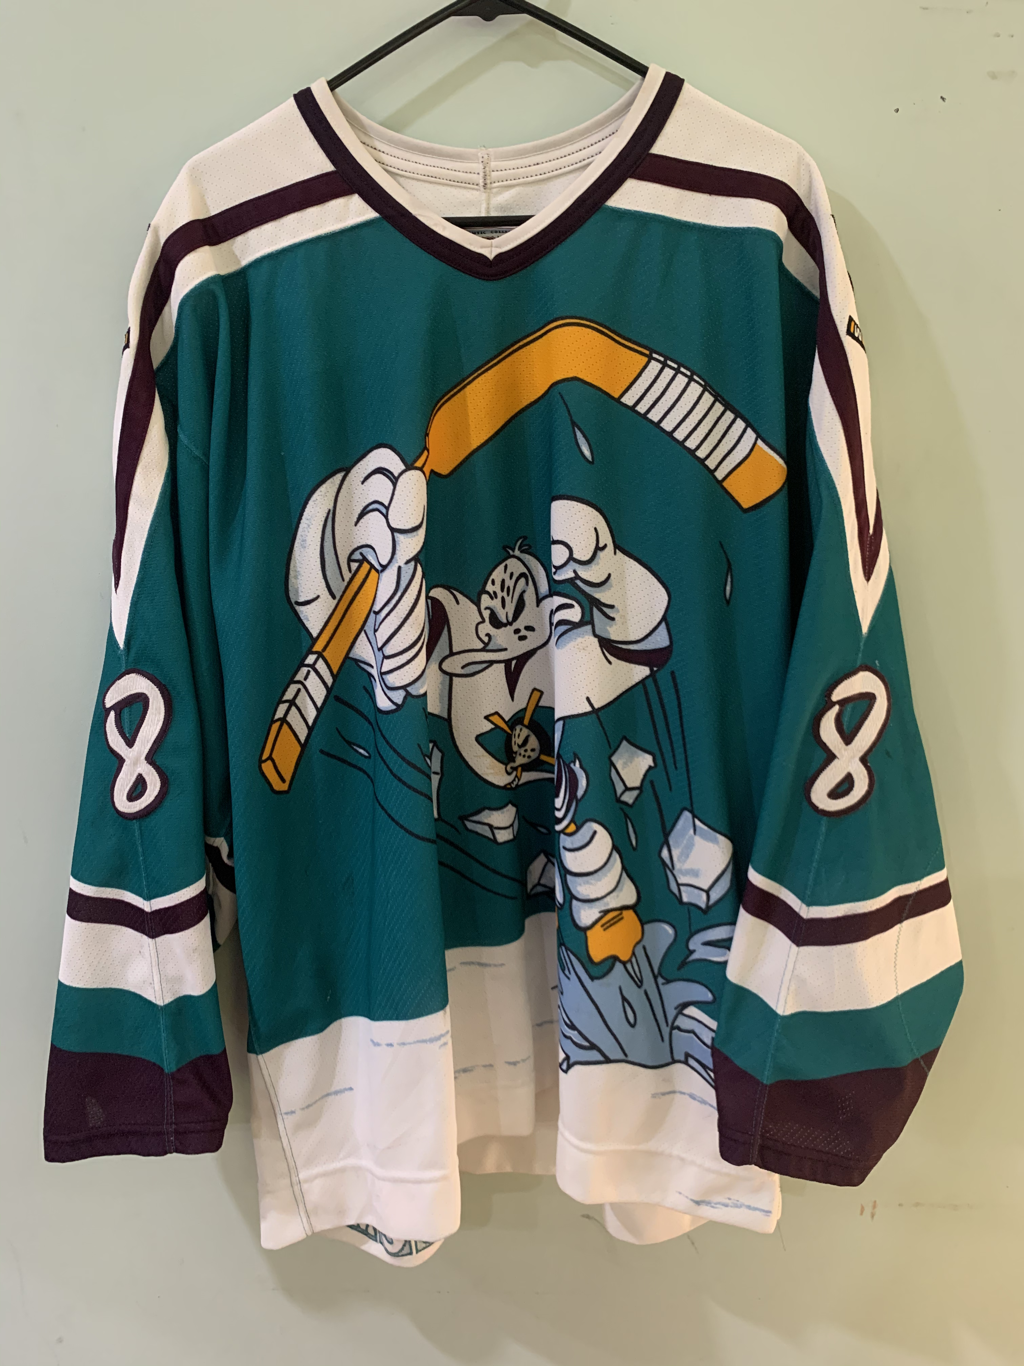 1995-96 Claude Lemieux Colorado Avalanche Game Worn Jersey - 1st Year  Franchise - Stanley Cup Season